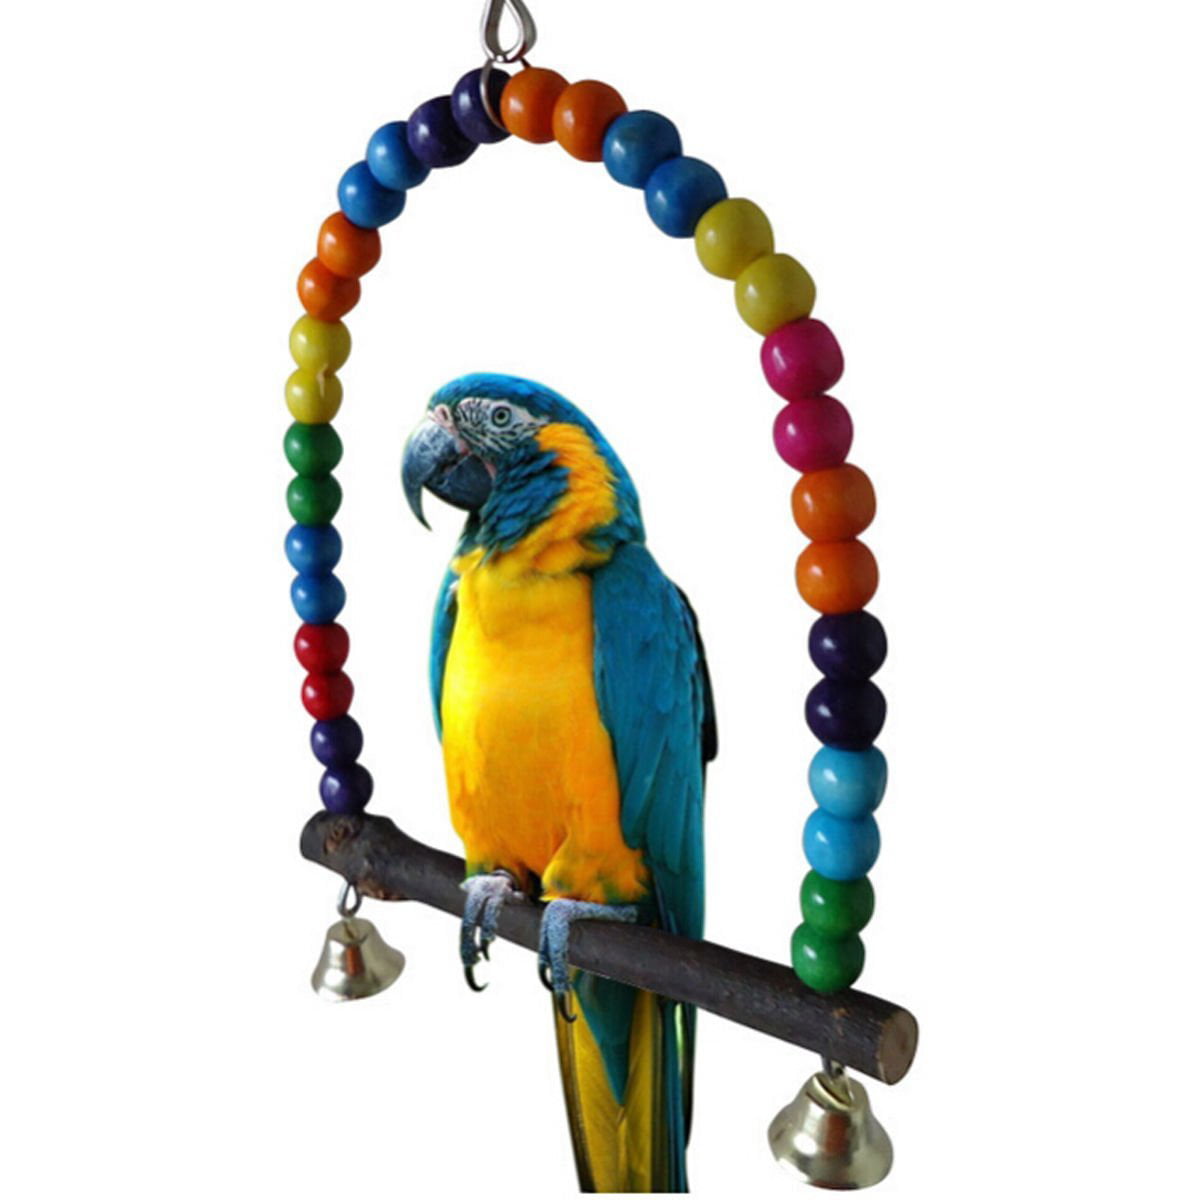 ACEONE Bird Toys Parrot Swing Toy with Colorful Wooden Beads Bells and Pet Bird Cage Hammock Hanging Chew Toys for Small Parakeets Cockatiels Love Birds Finches 7Pcs Macaws Conures 